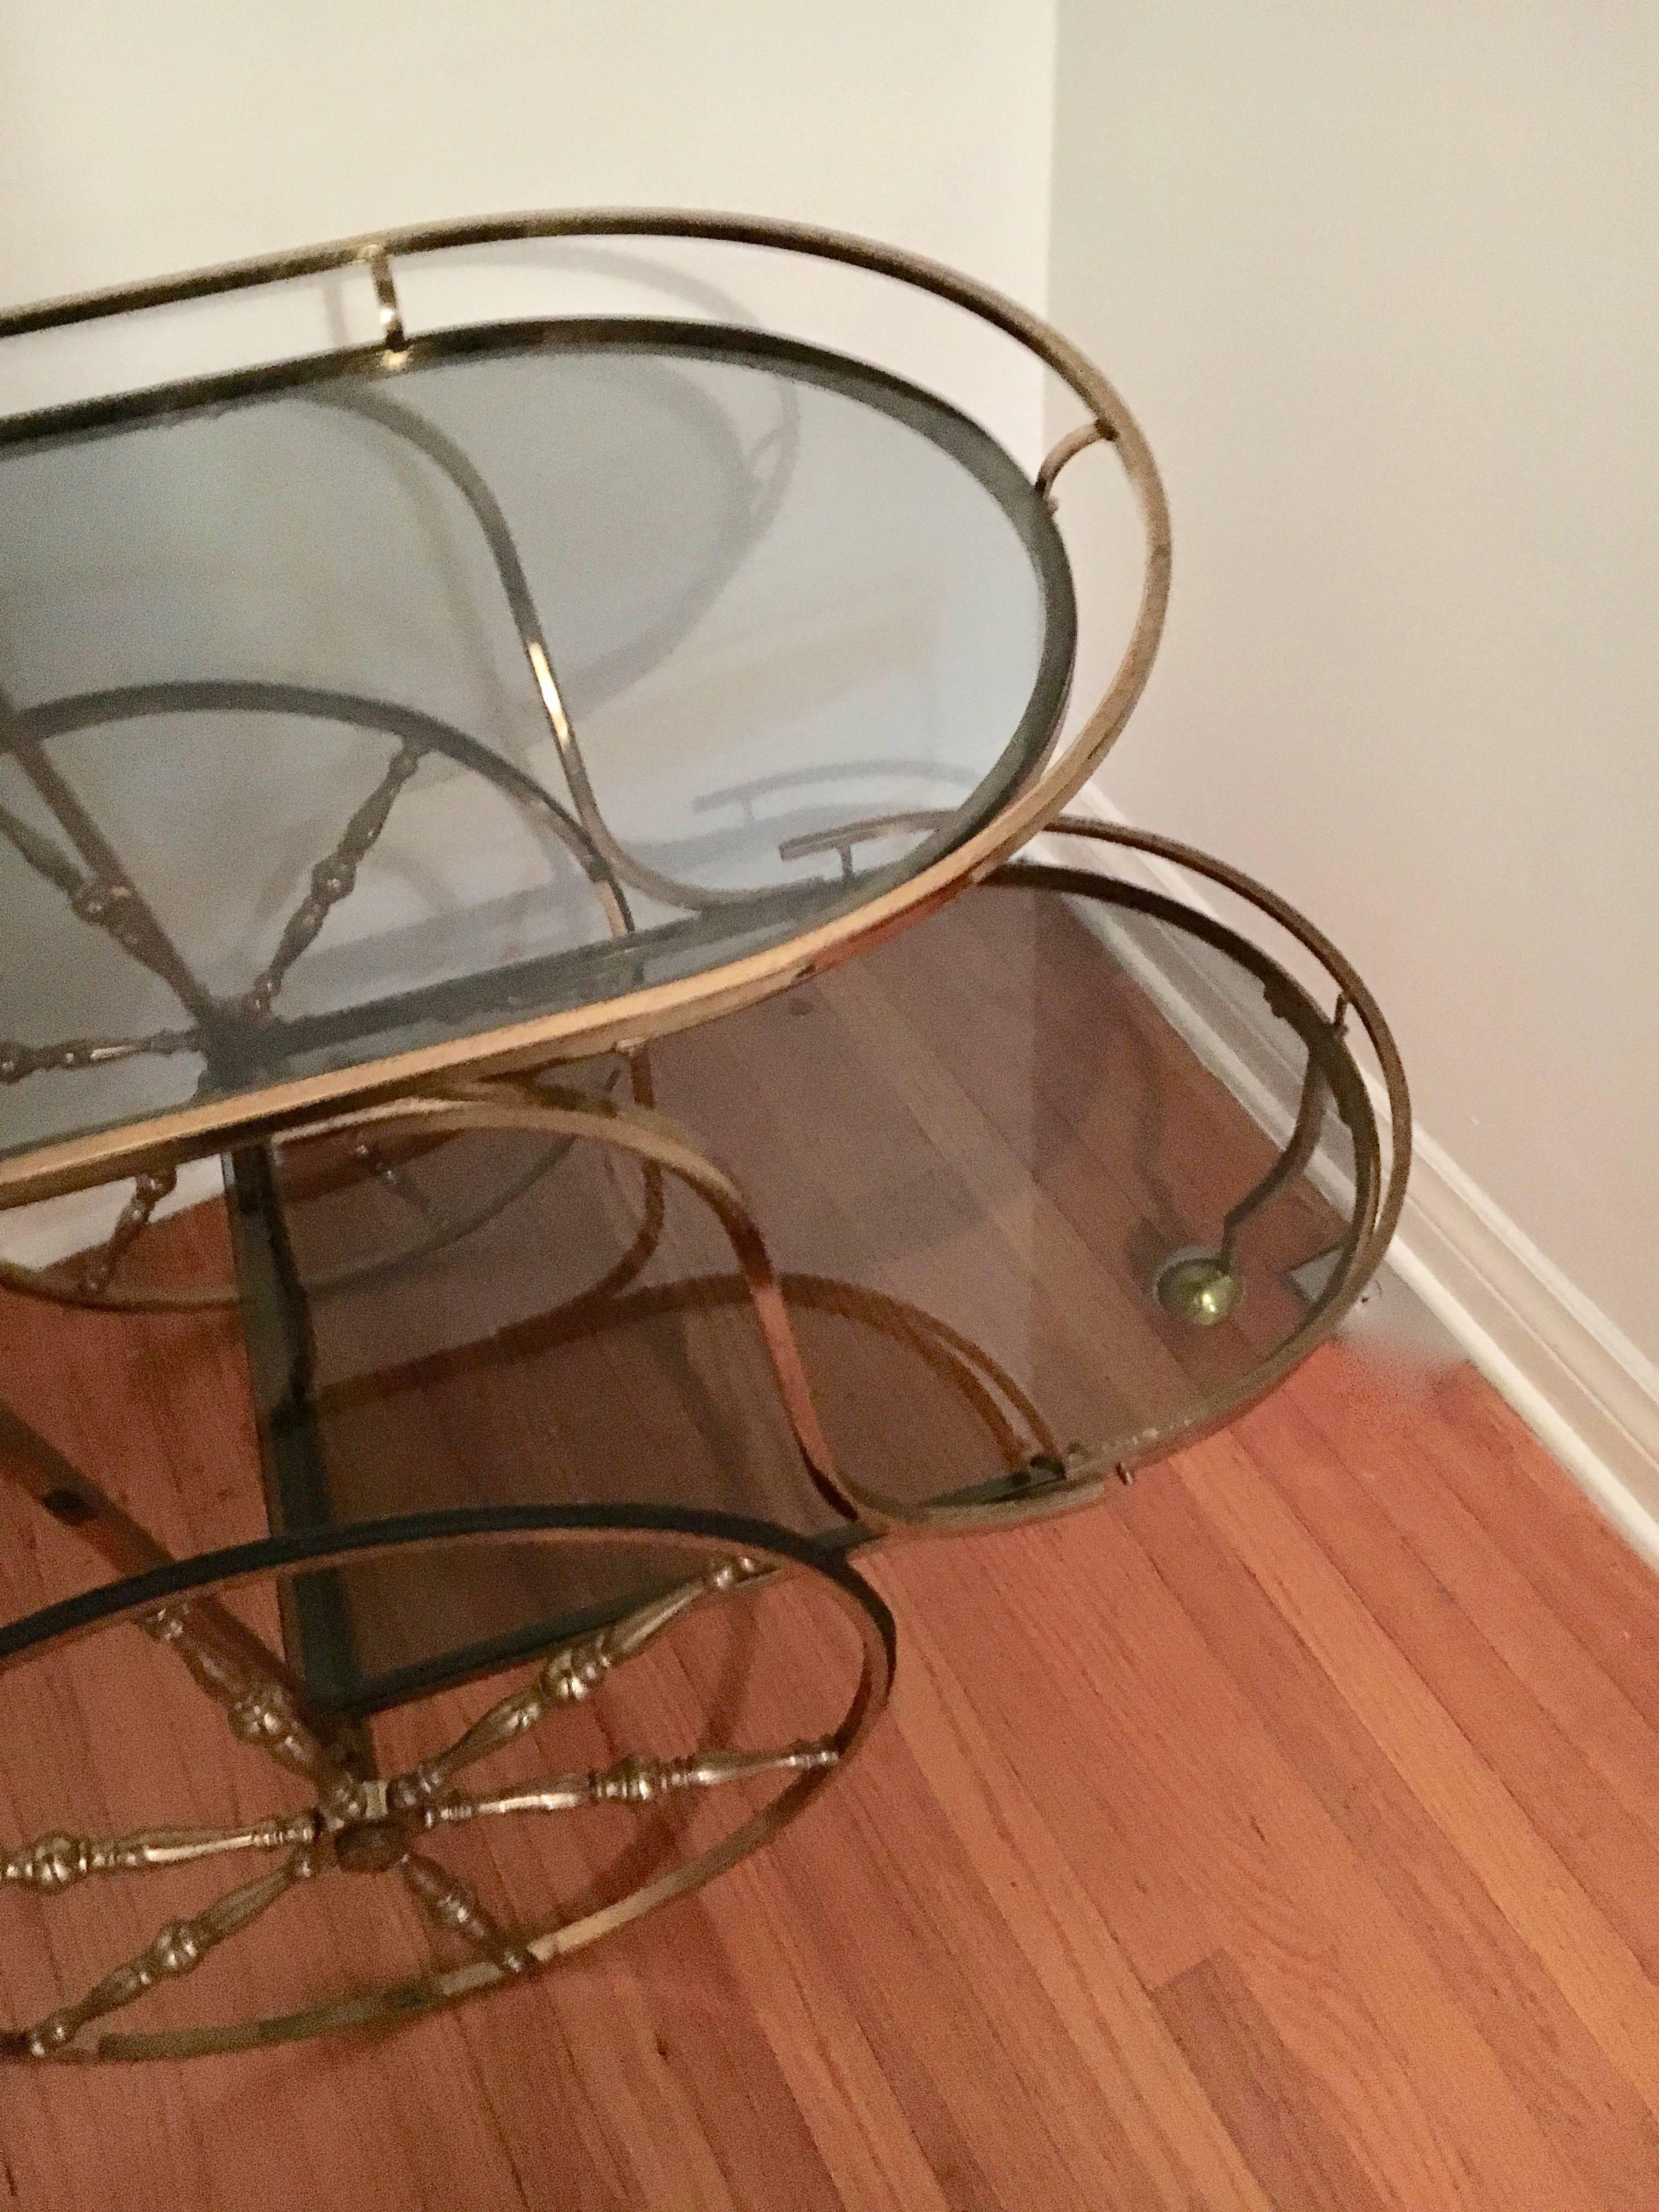 Midcentury Italian brass bar cart - two levels and three large wheels - two larger and one caster... great for any room with spirits that can travel! We have added new glass on both levels - smoked glass for a sexier bar!.